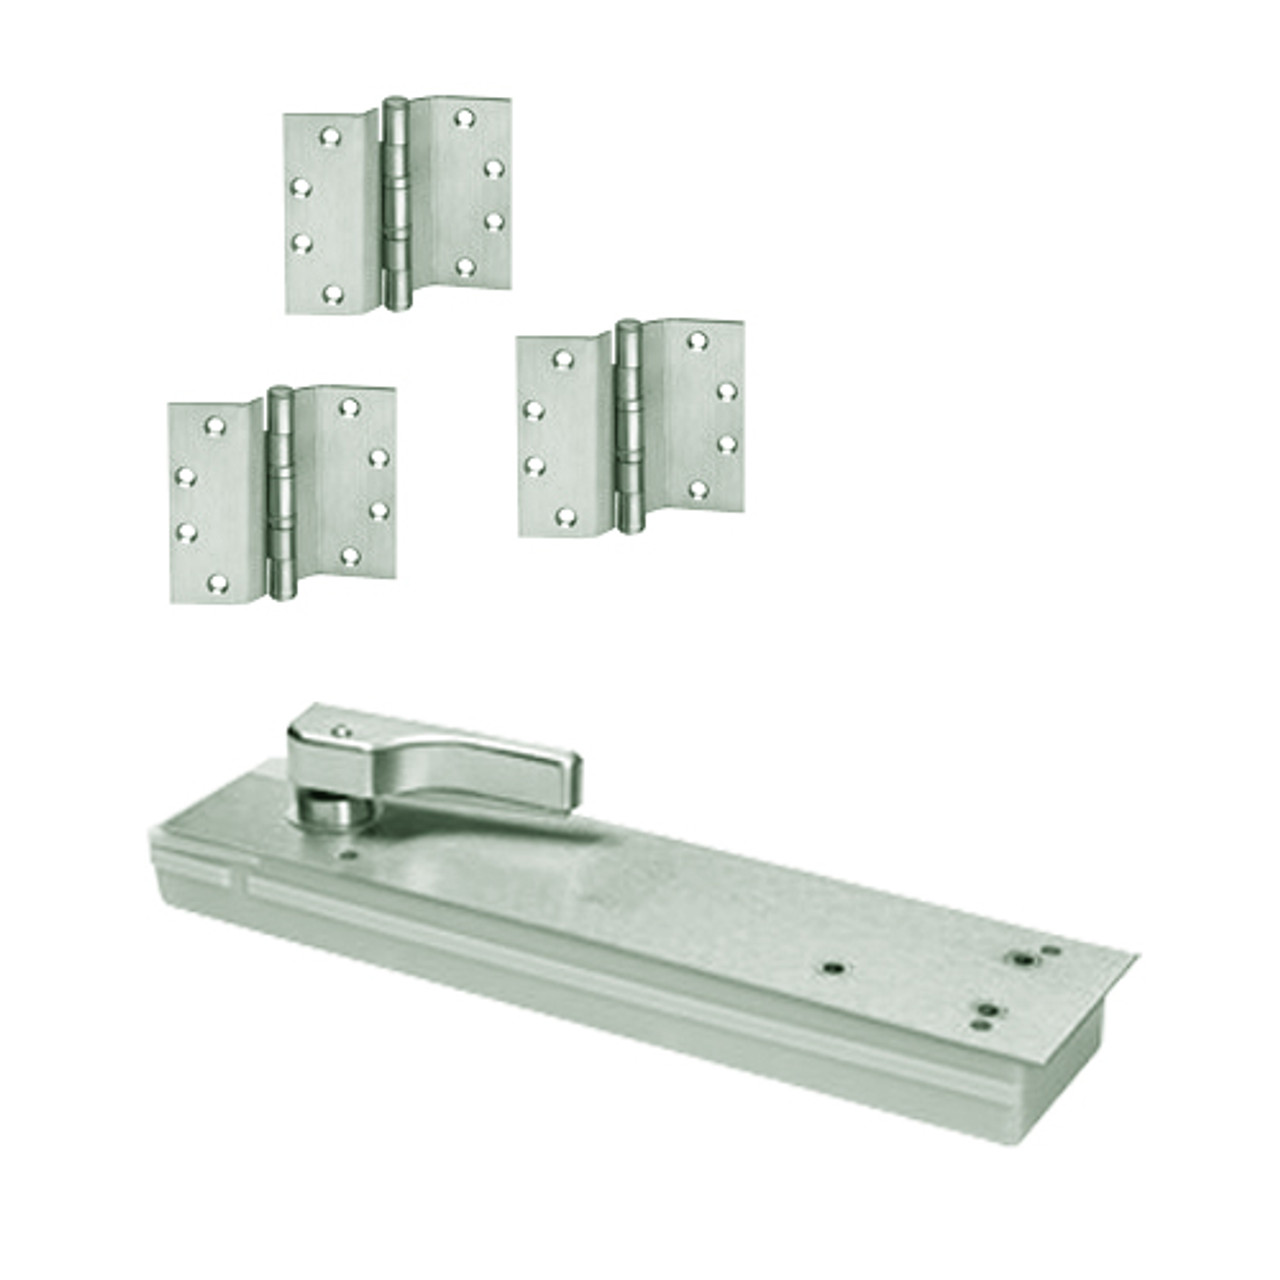 HM5104ABC105-LH-619 Rixson HM51 Series 3/4" Offset Hung Shallow Depth Floor Closers in Satin Nickel Finish